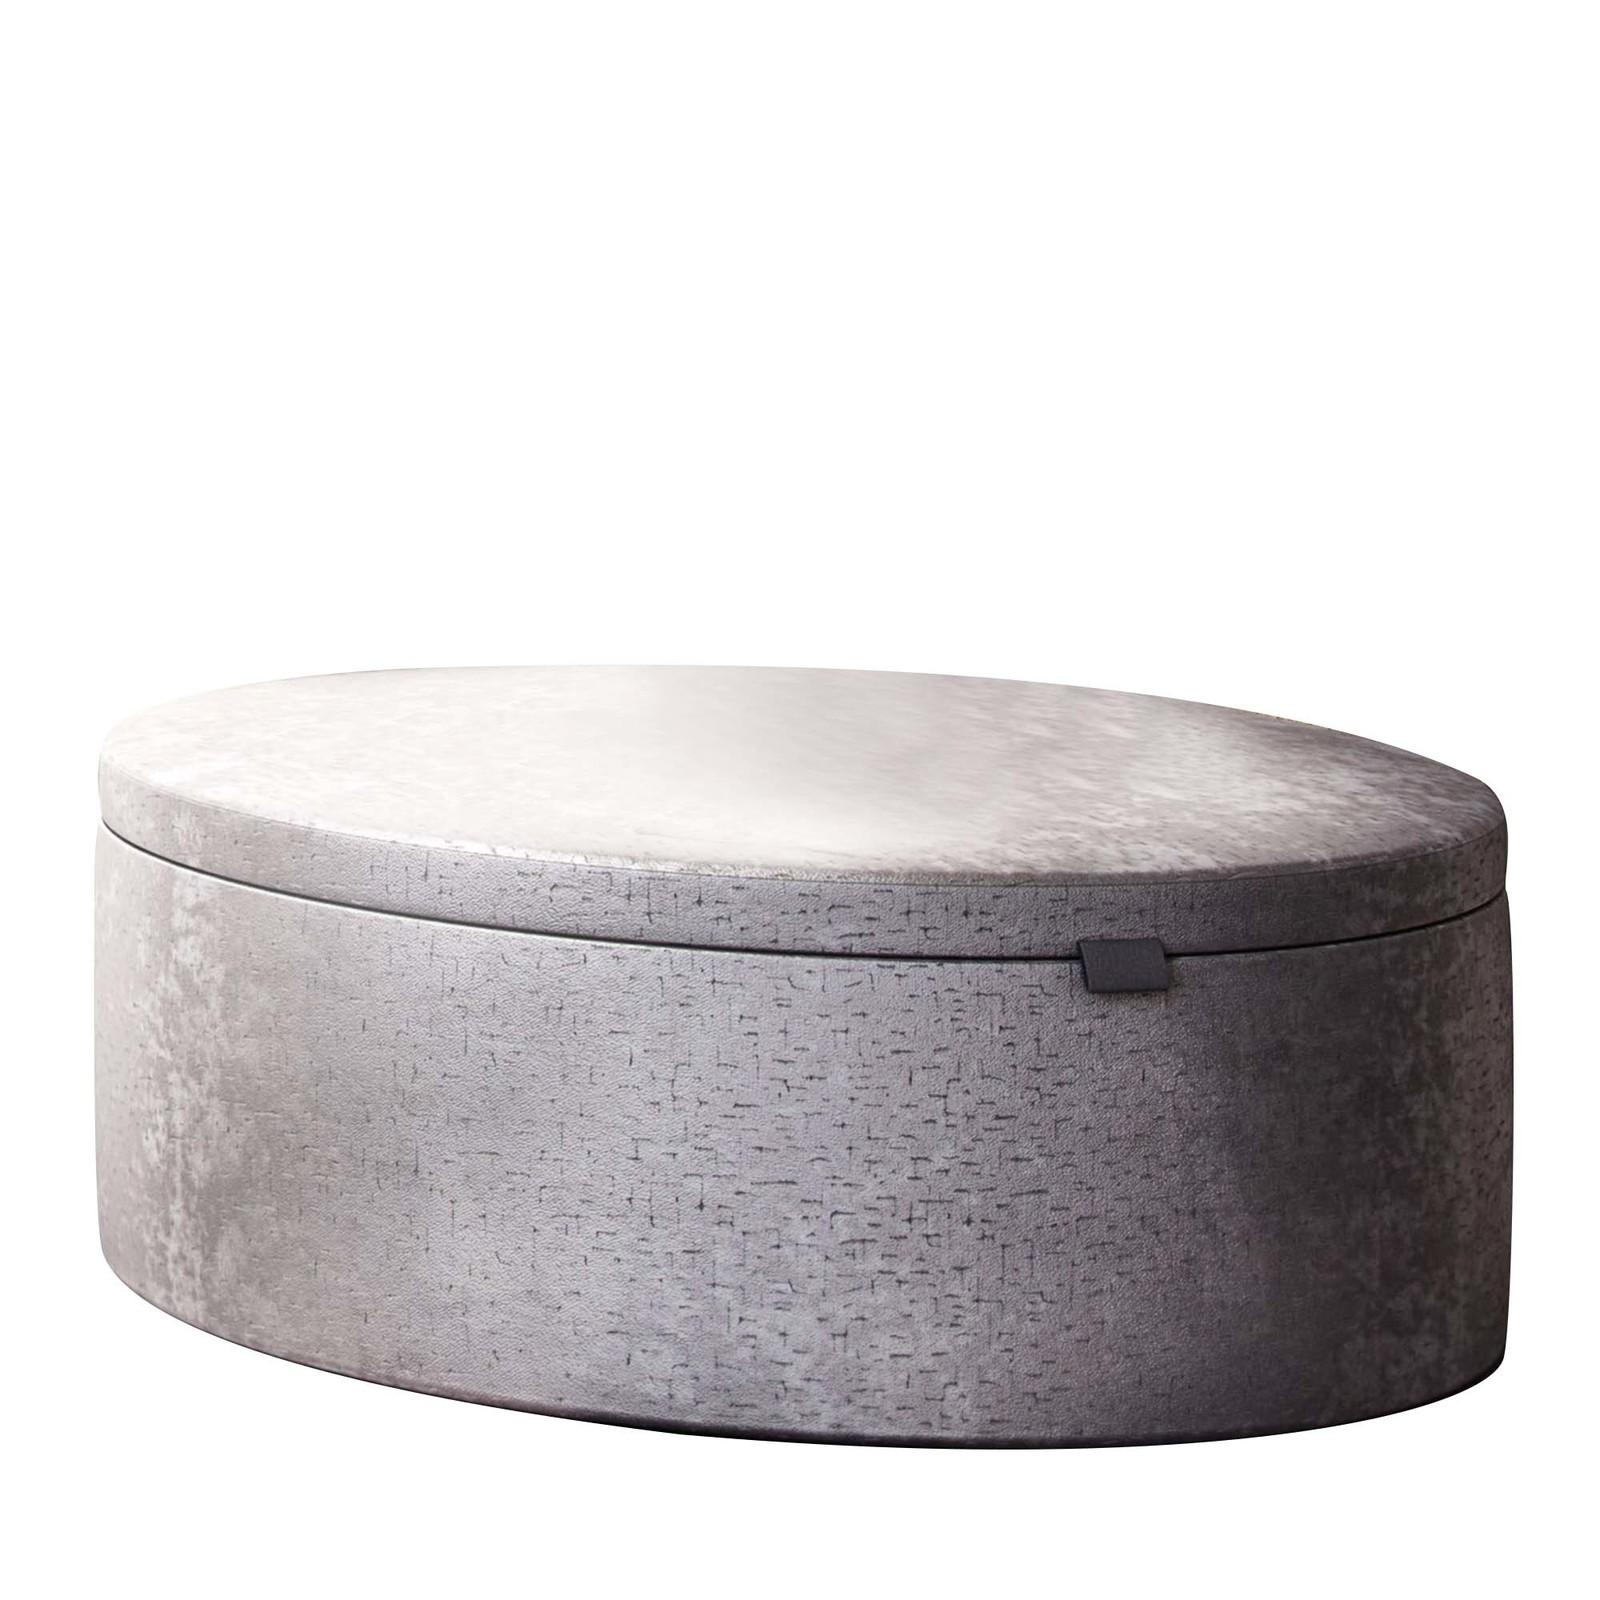 This versatile and stylish pouf boasts a linear silhouette comprising a structure in curved poplar plywood. Maximum comfort is provided by multi-density polyurethane padding upholstered throughout with a proprietary luxury fabric in gray. The top